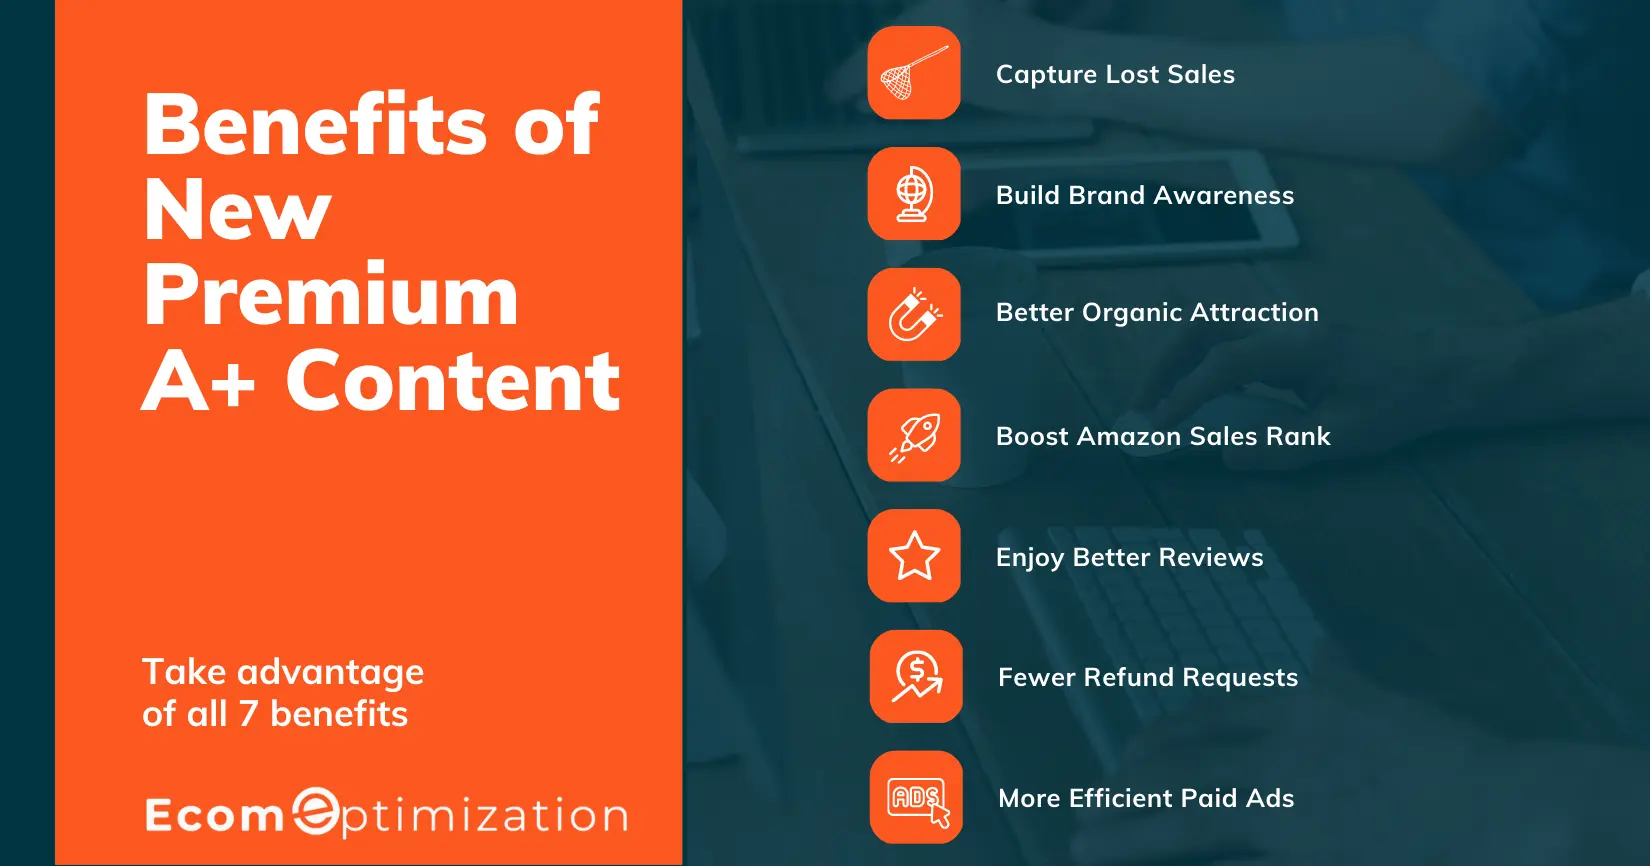 The Benefits of New Premium A+ Content